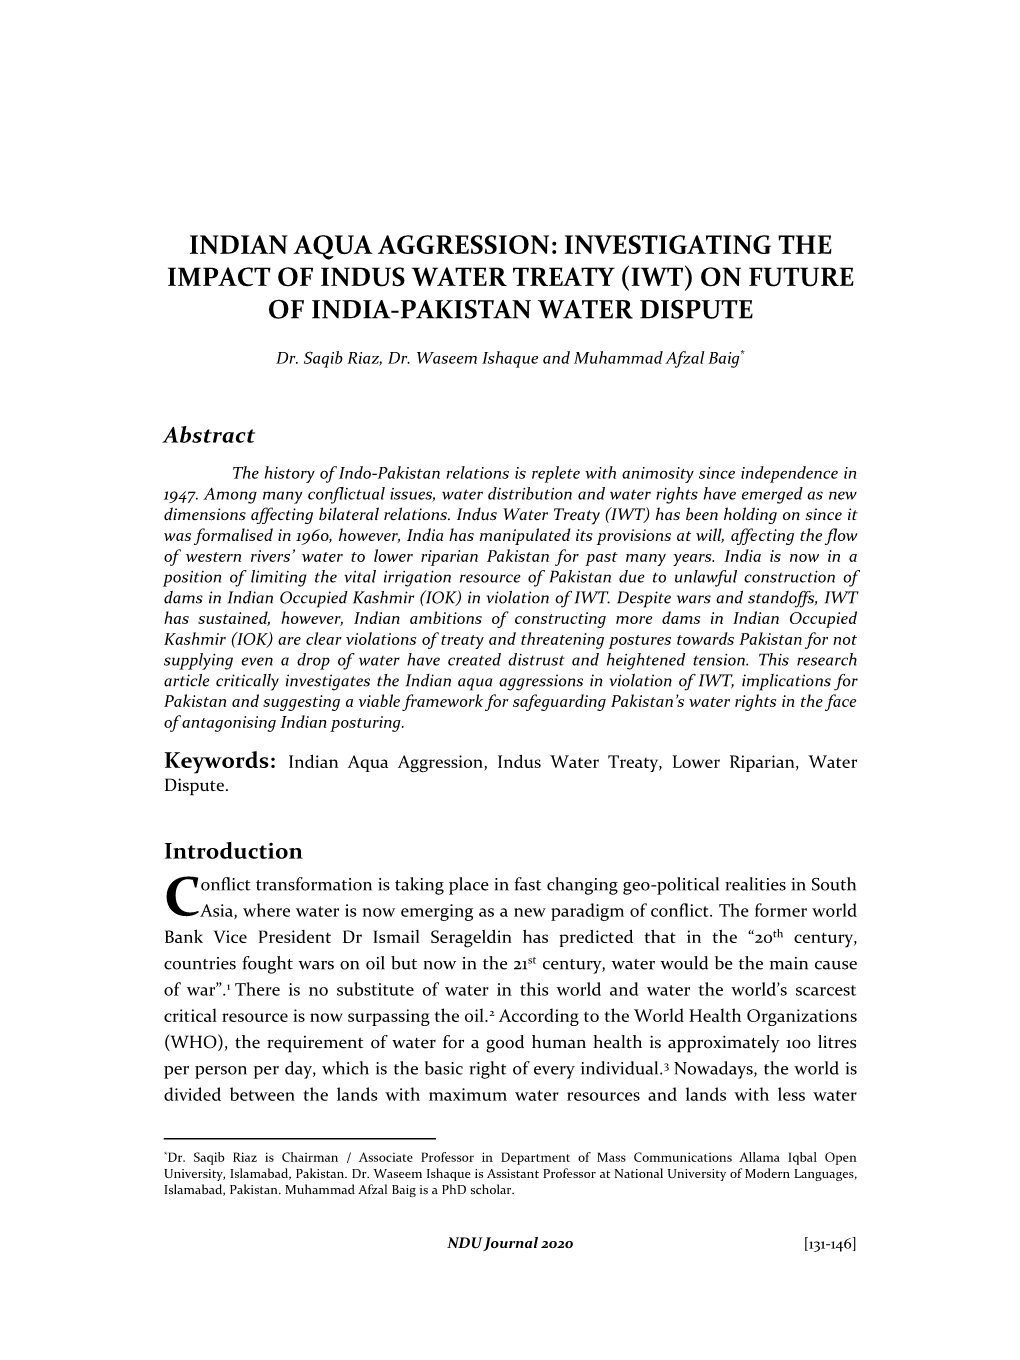 Indian Aqua Aggression: Investigating the Impact of Indus Water Treaty (Iwt) on Future of India-Pakistan Water Dispute